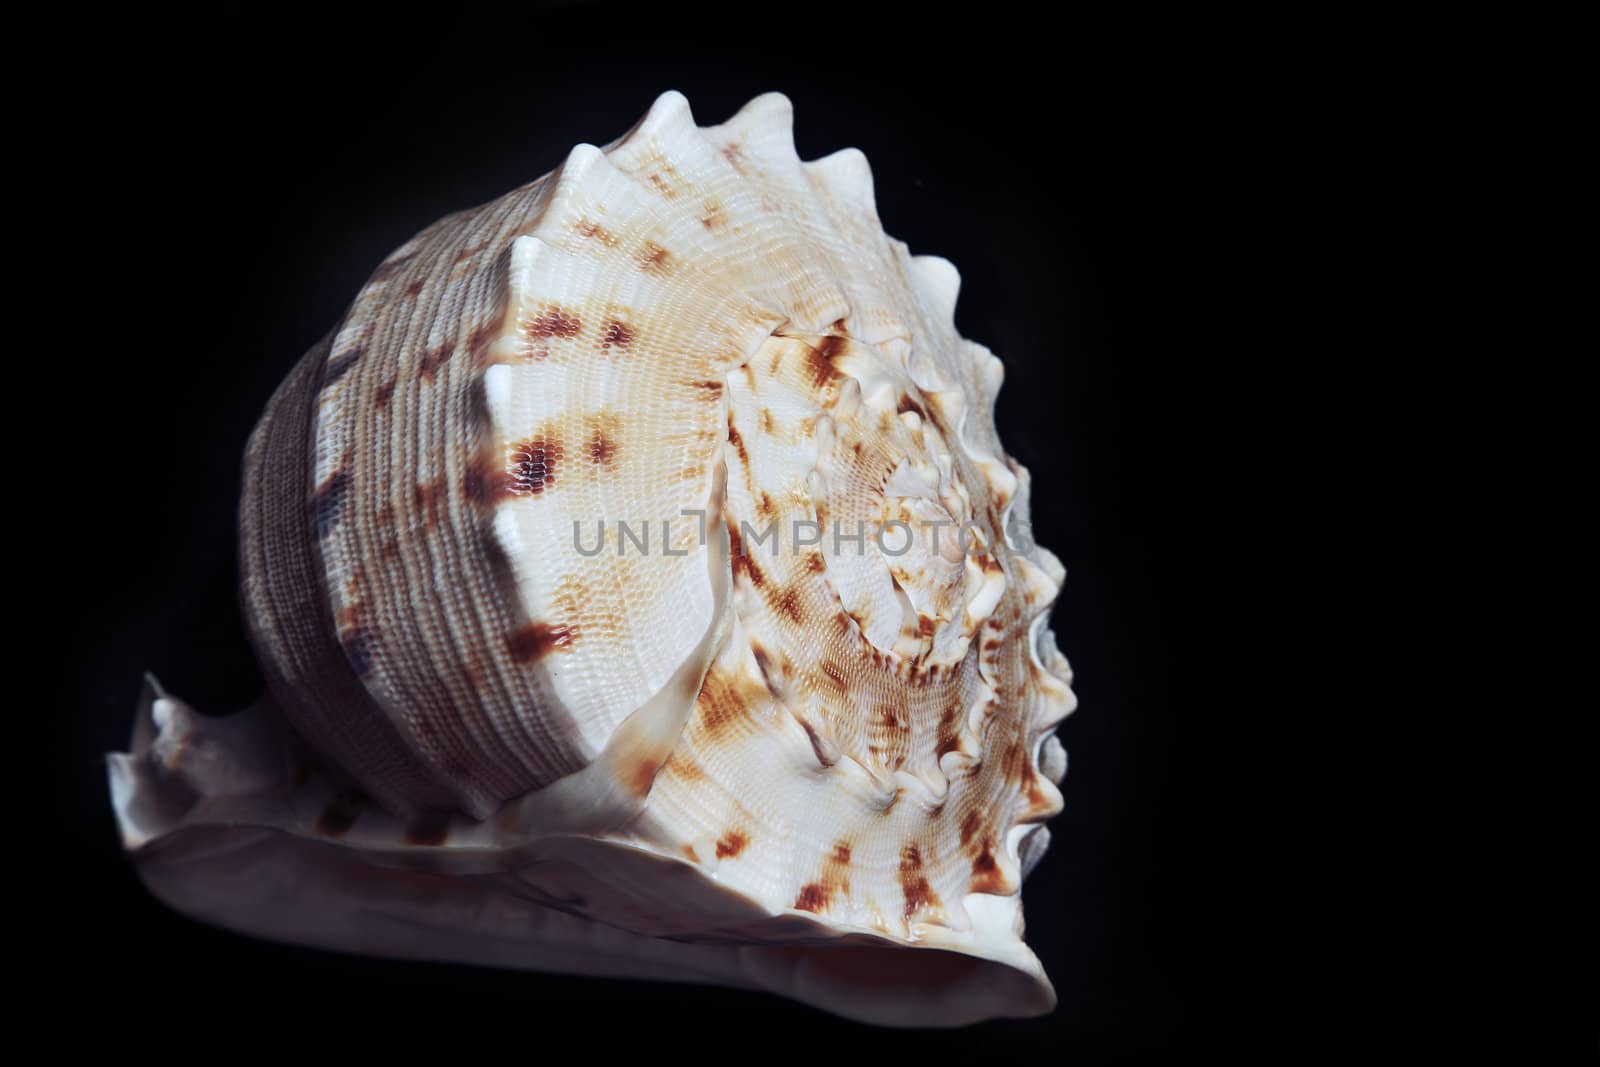 Close-up photo of the seashell on a dark background